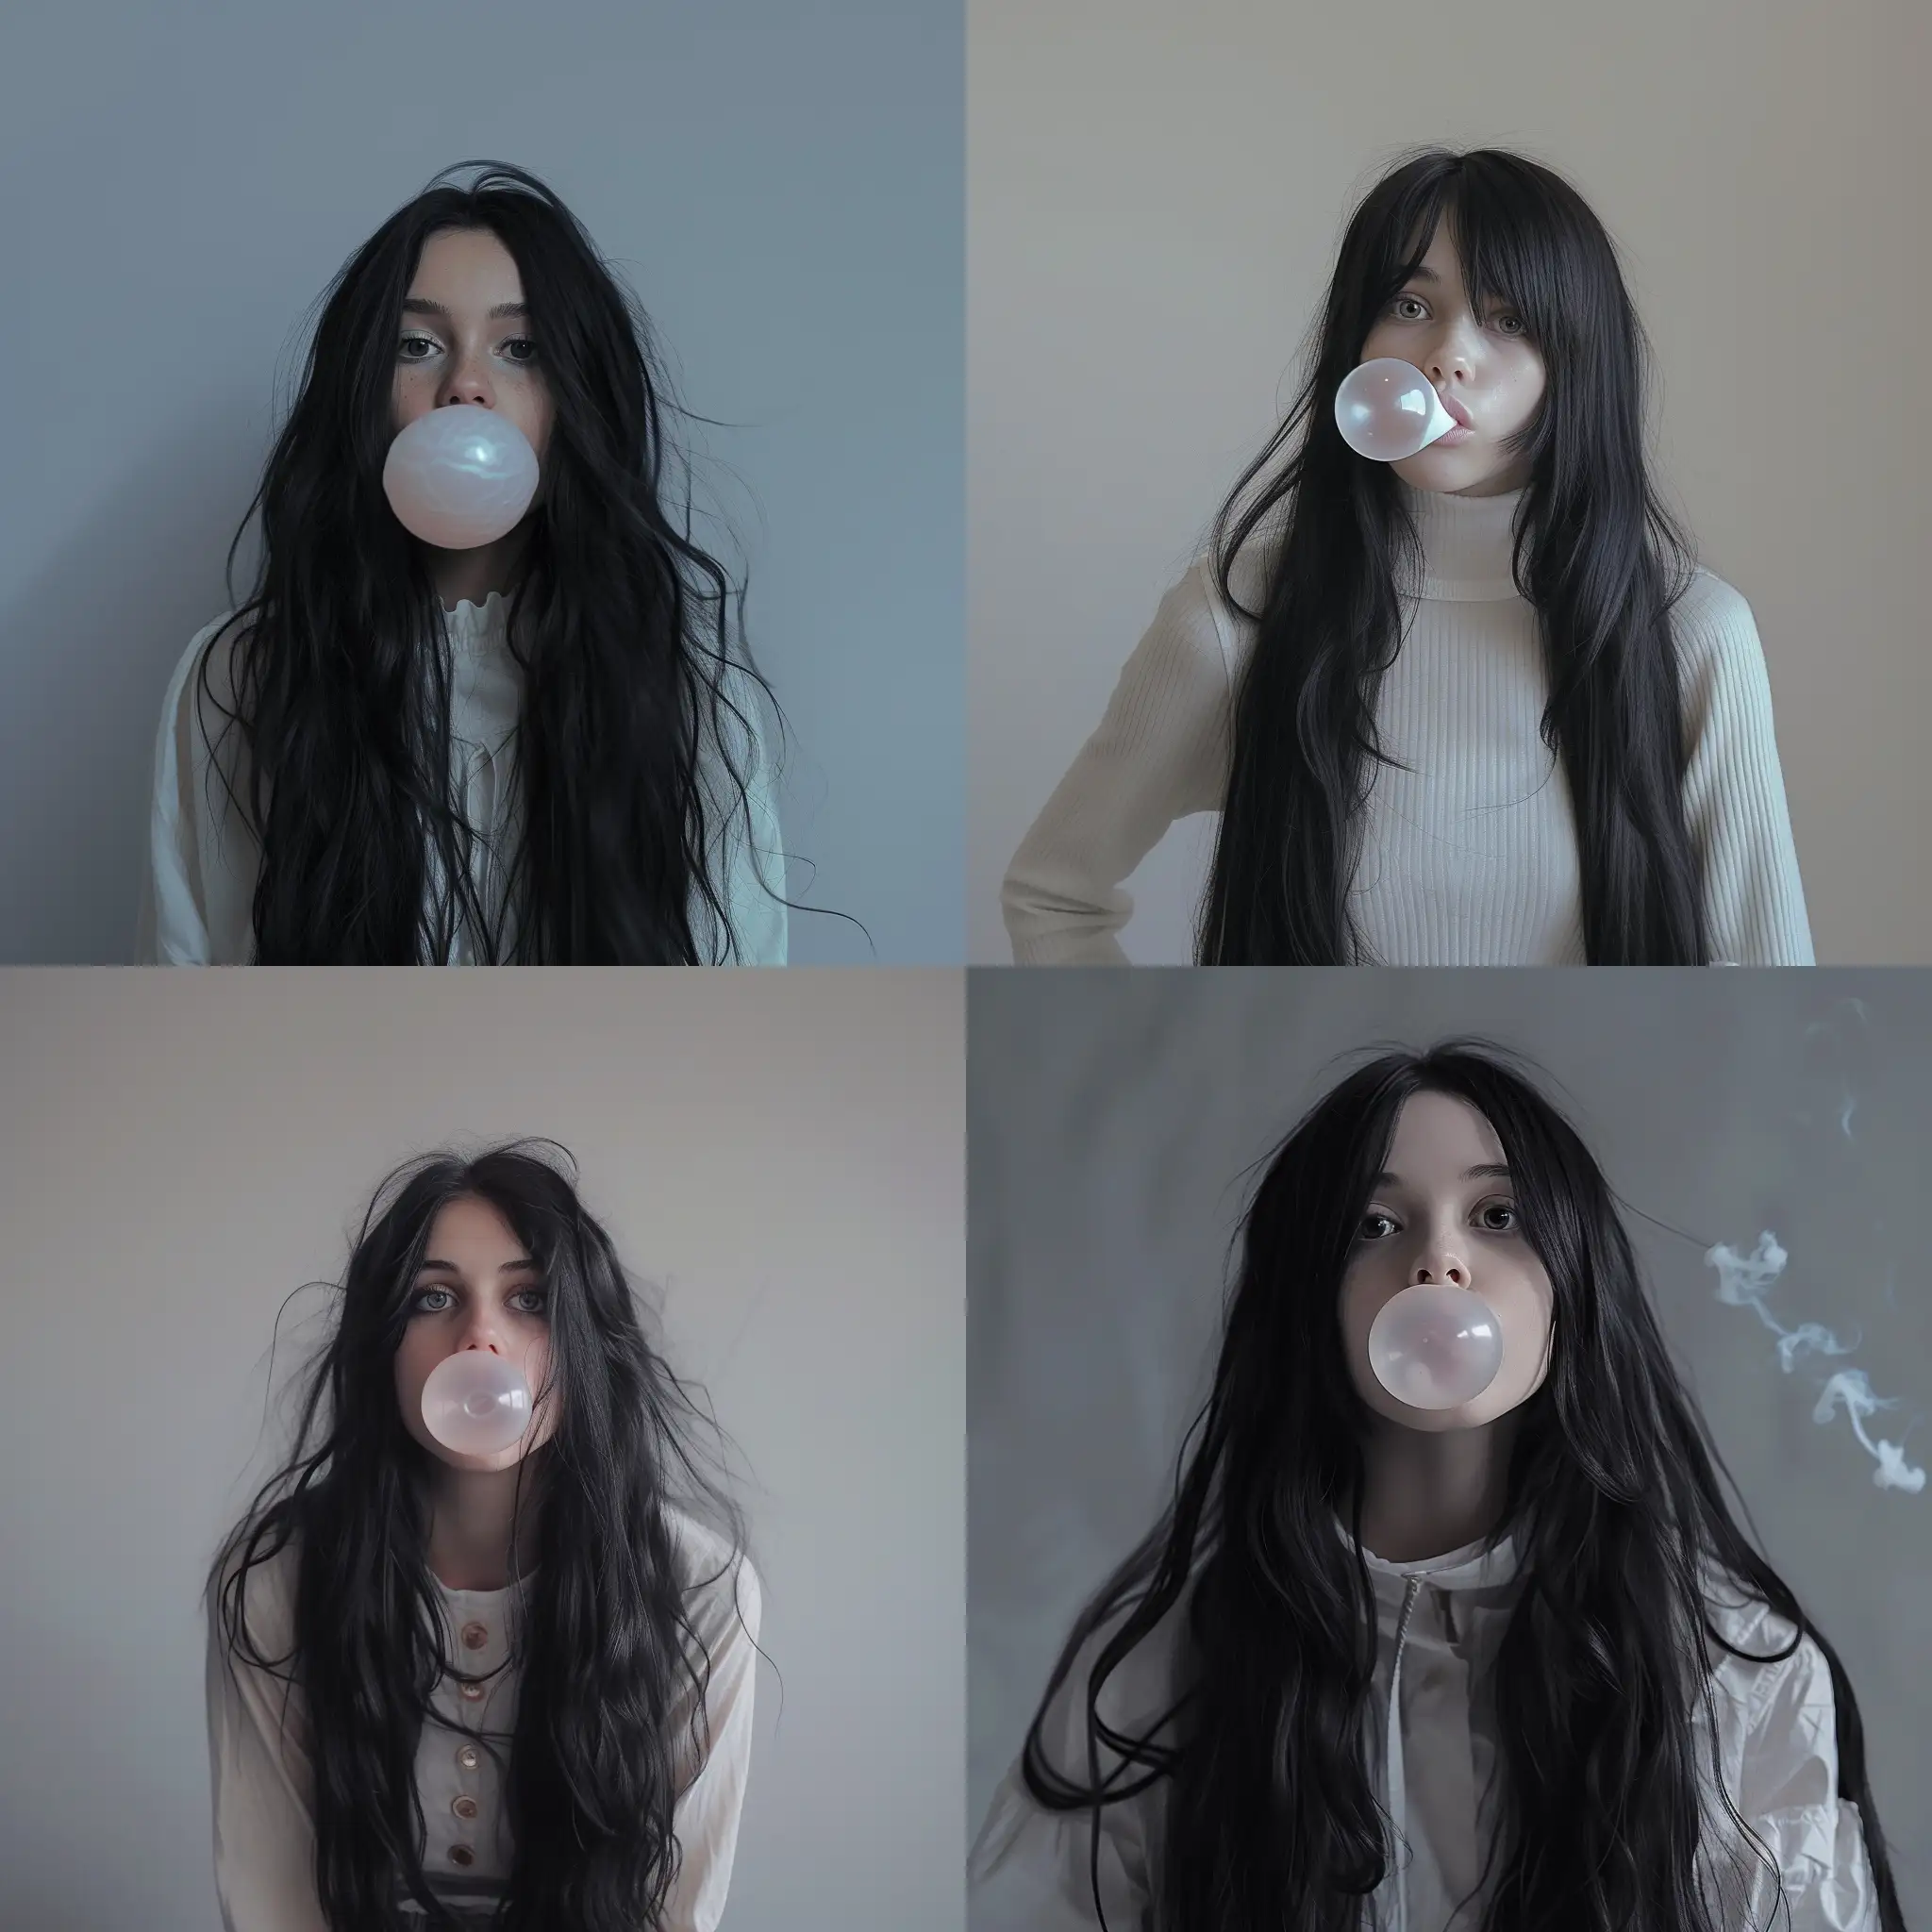 Aesthetic instagram picture girl with long black hair blowing bubblegum